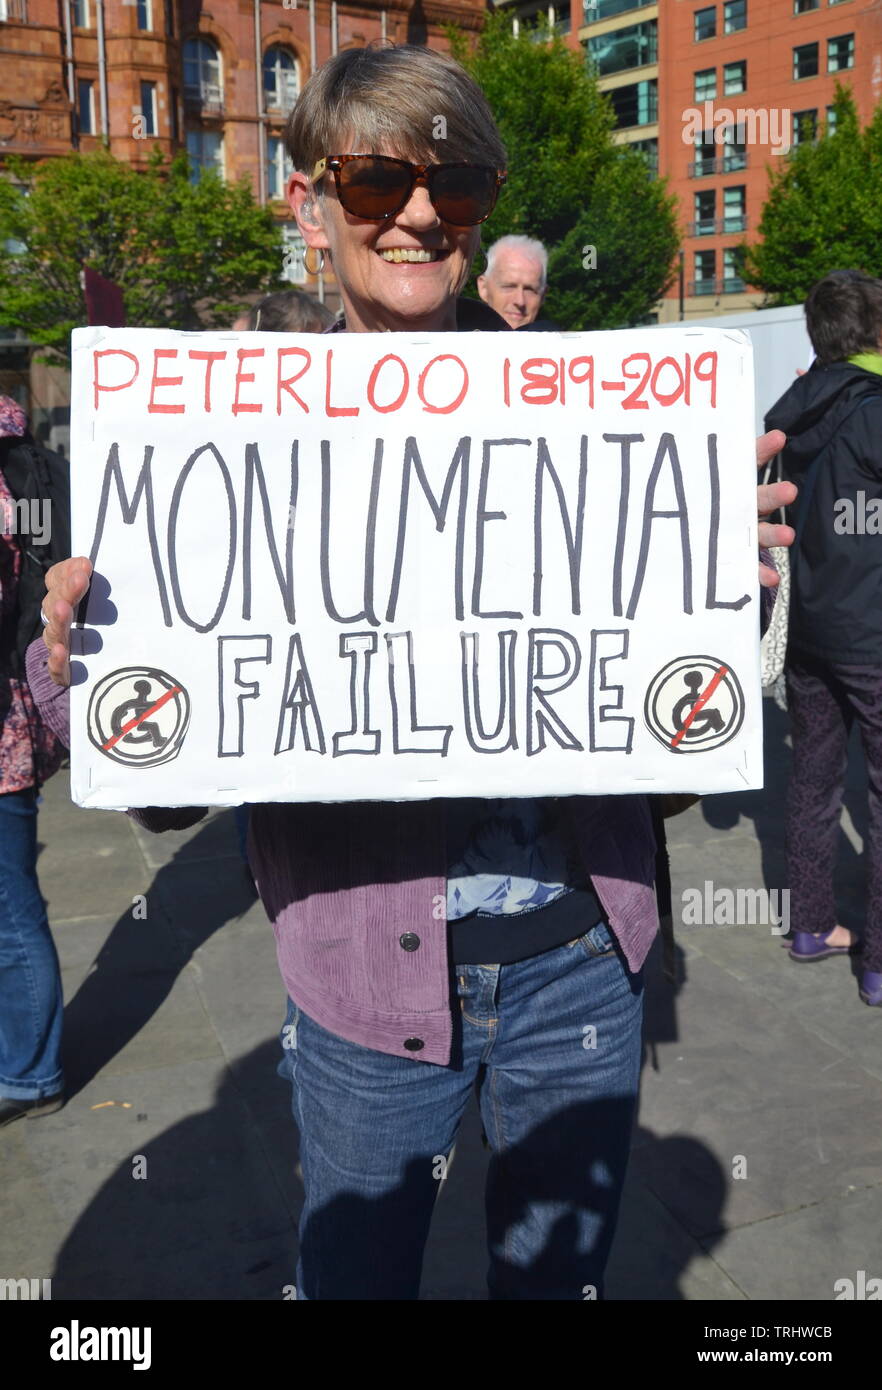 June 6, 2019. Actress and writer Ali Briggs who plays Freda Burgess in TV soap Coronation Street joins disabled people and supporters protesting at the site where a memorial to commemorate the Peterloo massacre of 1819 is being built in Manchester uk. The memorial, developed by Manchester City Council, will currently be a landscaped hill made out of concentric steps. The protesters argue that it is inaccessible for many disabled people and should be amended. Stock Photo